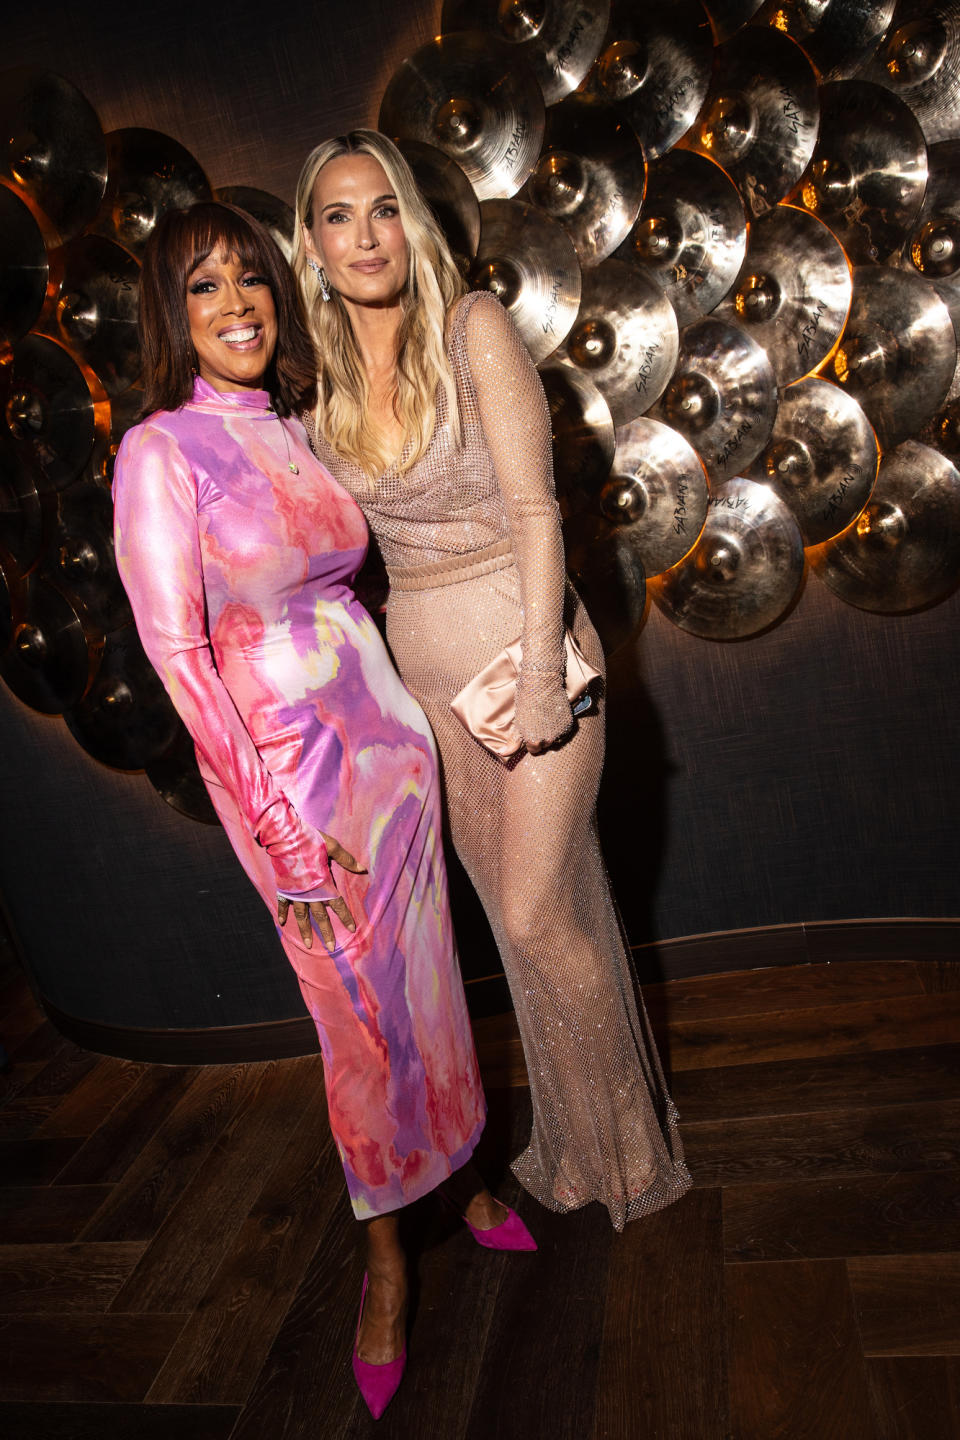 Gayle King and Molly Sims at the Sports Illustrated Swim Issue Launch Party held at the Hard Rock Hotel on May 18, 2023 in New York, New York.